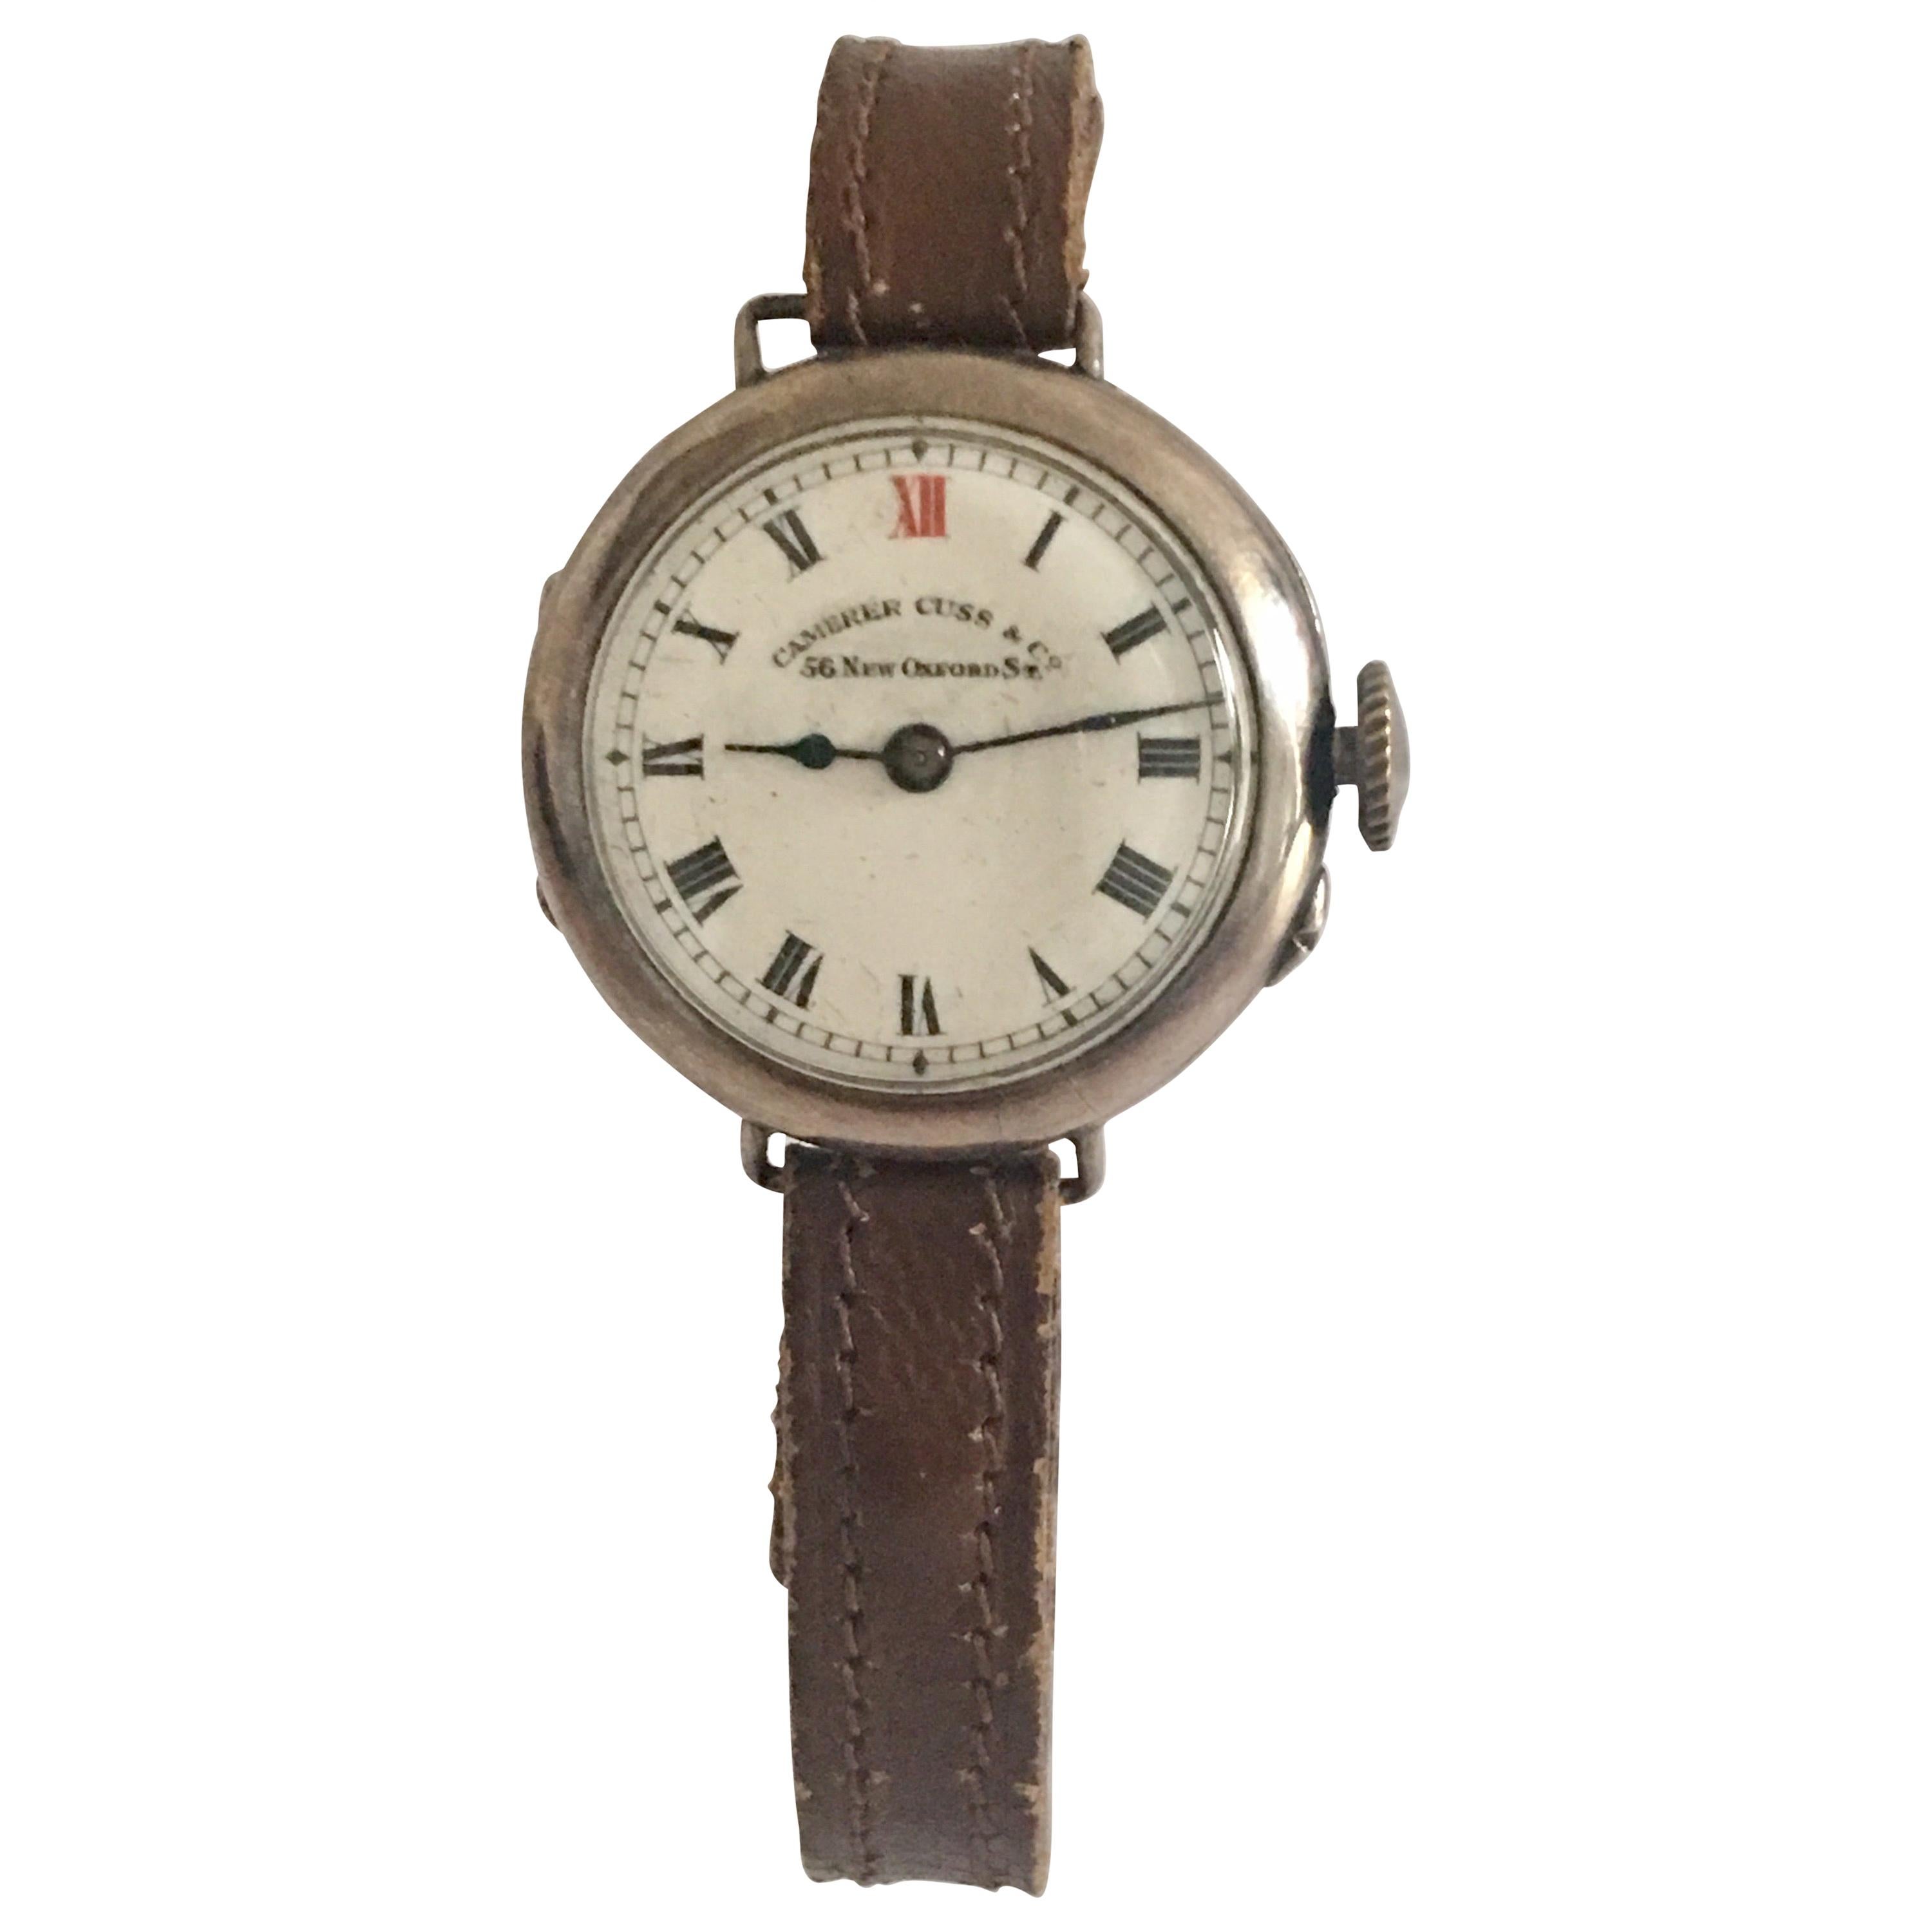 Antique Camerer Cuss & Co. Silver Trench Watch